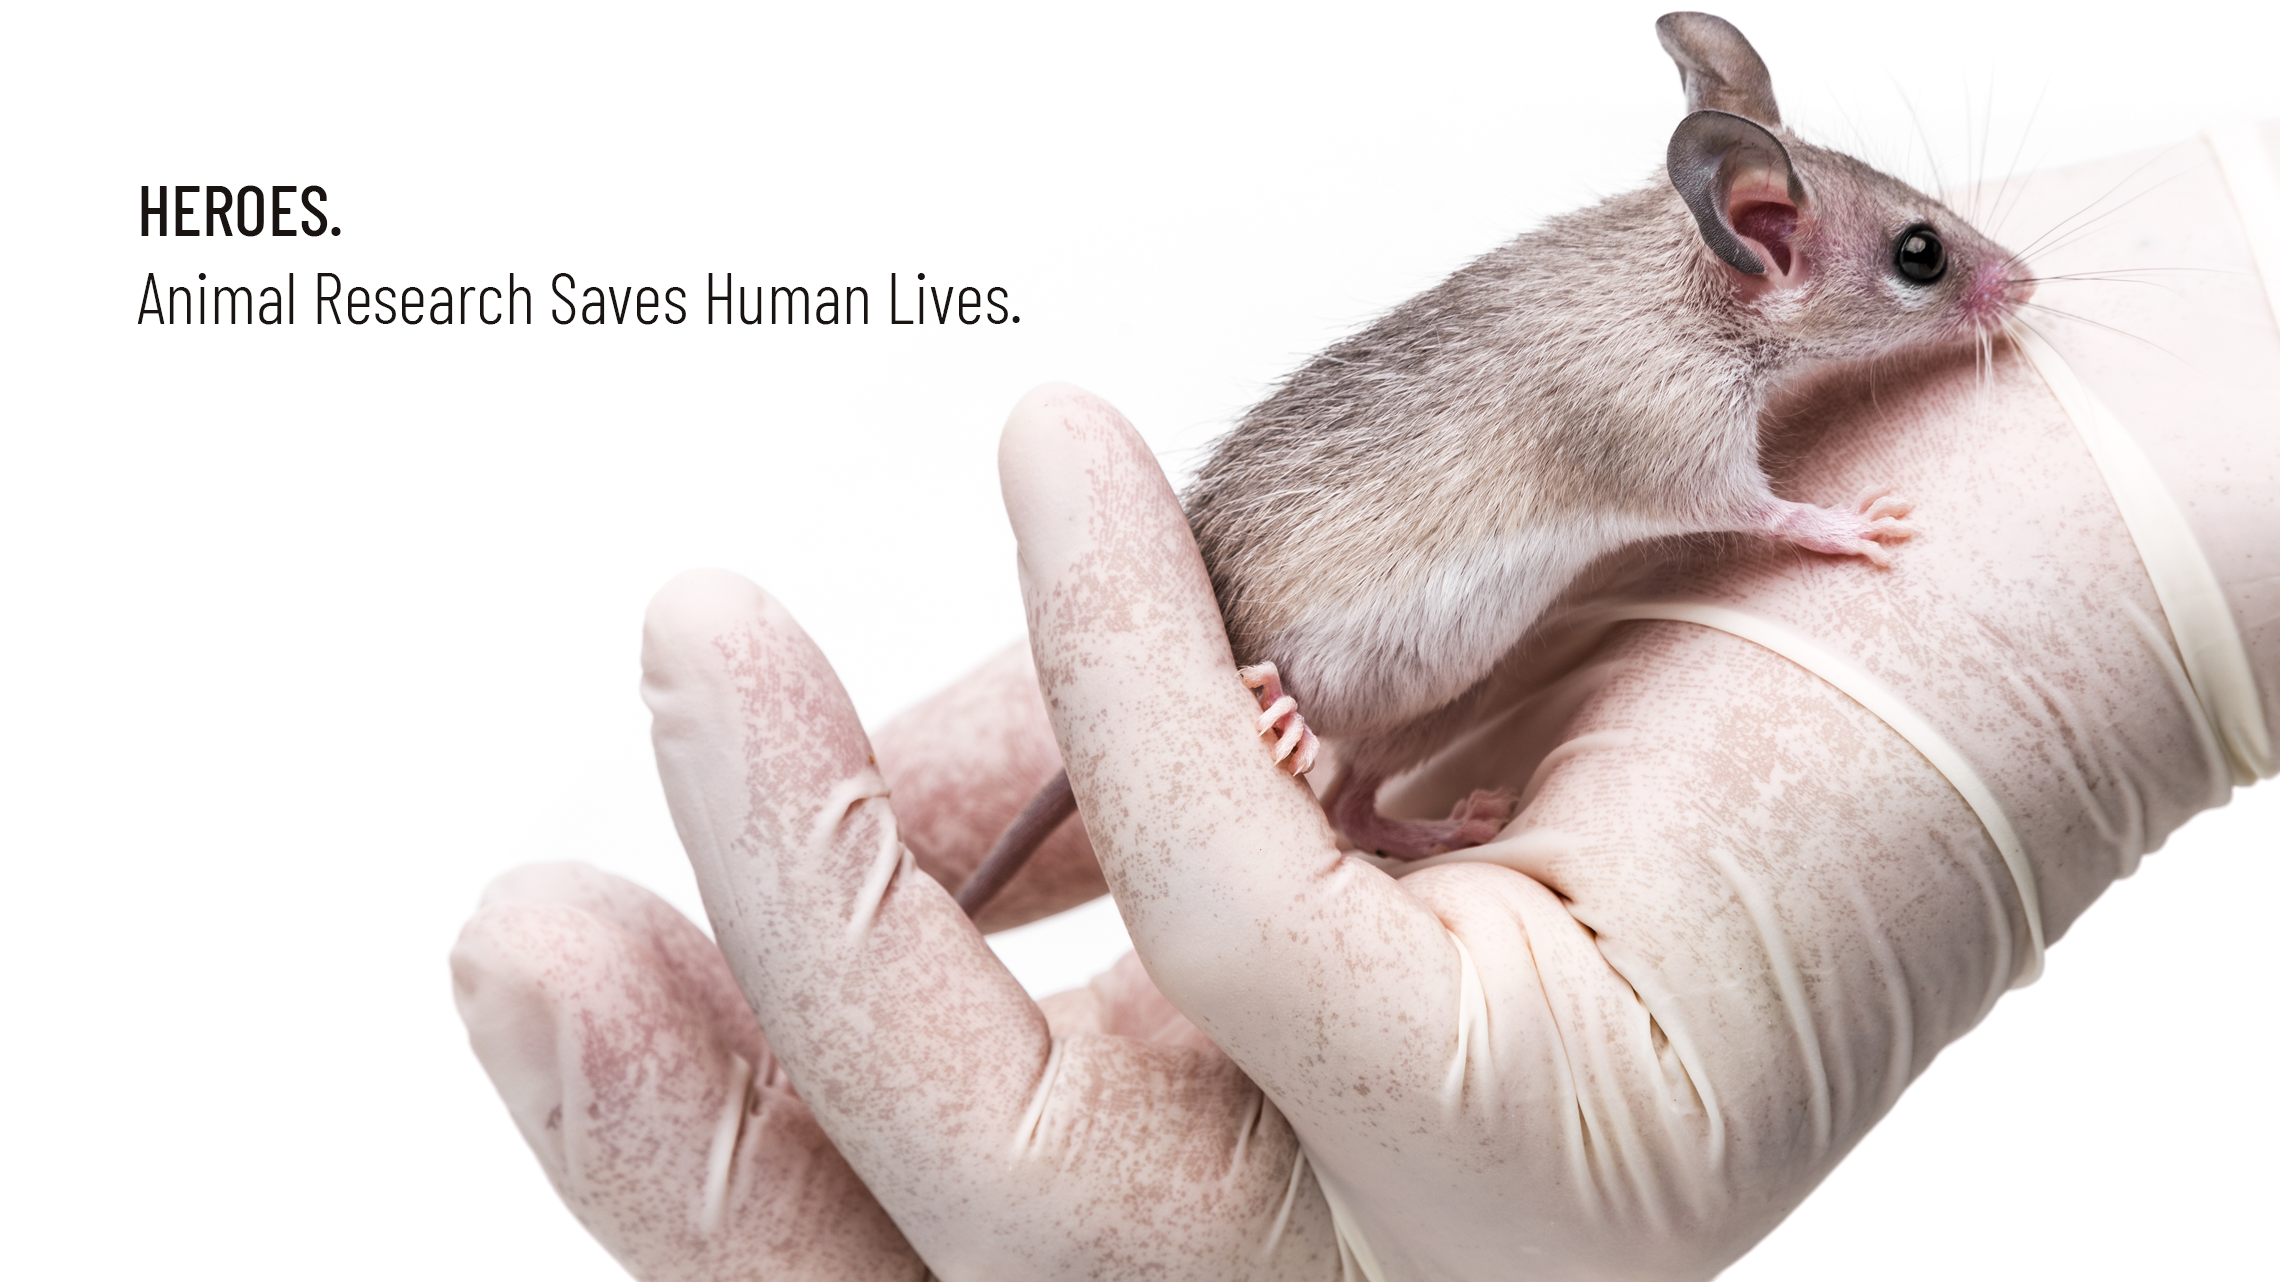 Researchers and the animals used for medical research are heroes.